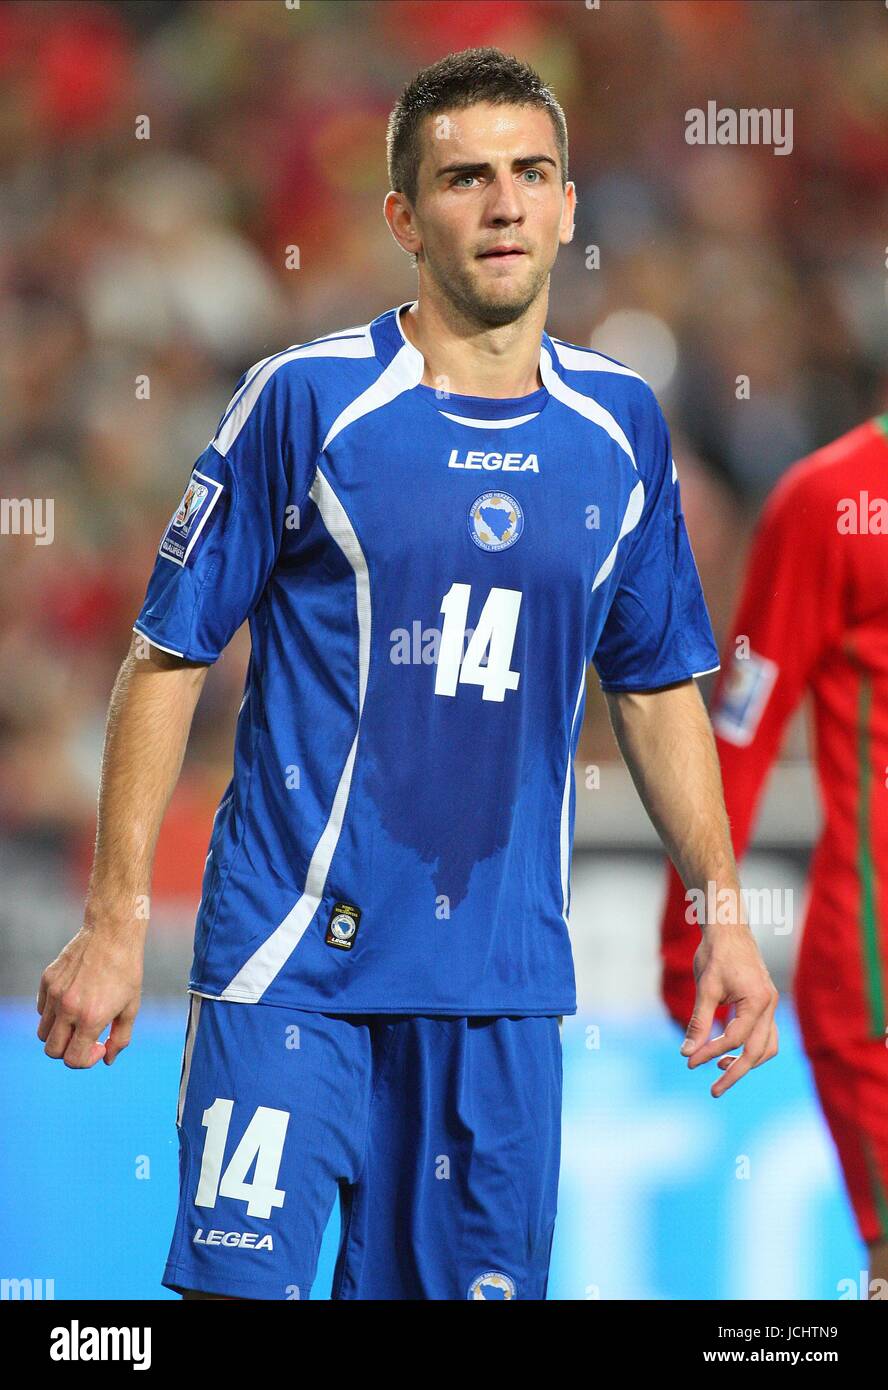 VEDAD IBISEVIC BOSNIA-HERZEGOVINA PORTUGAL V BOSNIA ESTADIO DA LUZ, LISBON, PORTUGAL 14 November 2009 GAA3628     WARNING! This Photograph May Only Be Used For Newspaper And/Or Magazine Editorial Purposes. May Not Be Used For, Internet/Online Usage Nor For Publications Involving 1 player, 1 Club Or 1 Competition, Without Written Authorisation From Football DataCo Ltd. For Any Queries, Please Contact Football DataCo Ltd on +44 (0) 207 864 9121 Stock Photo